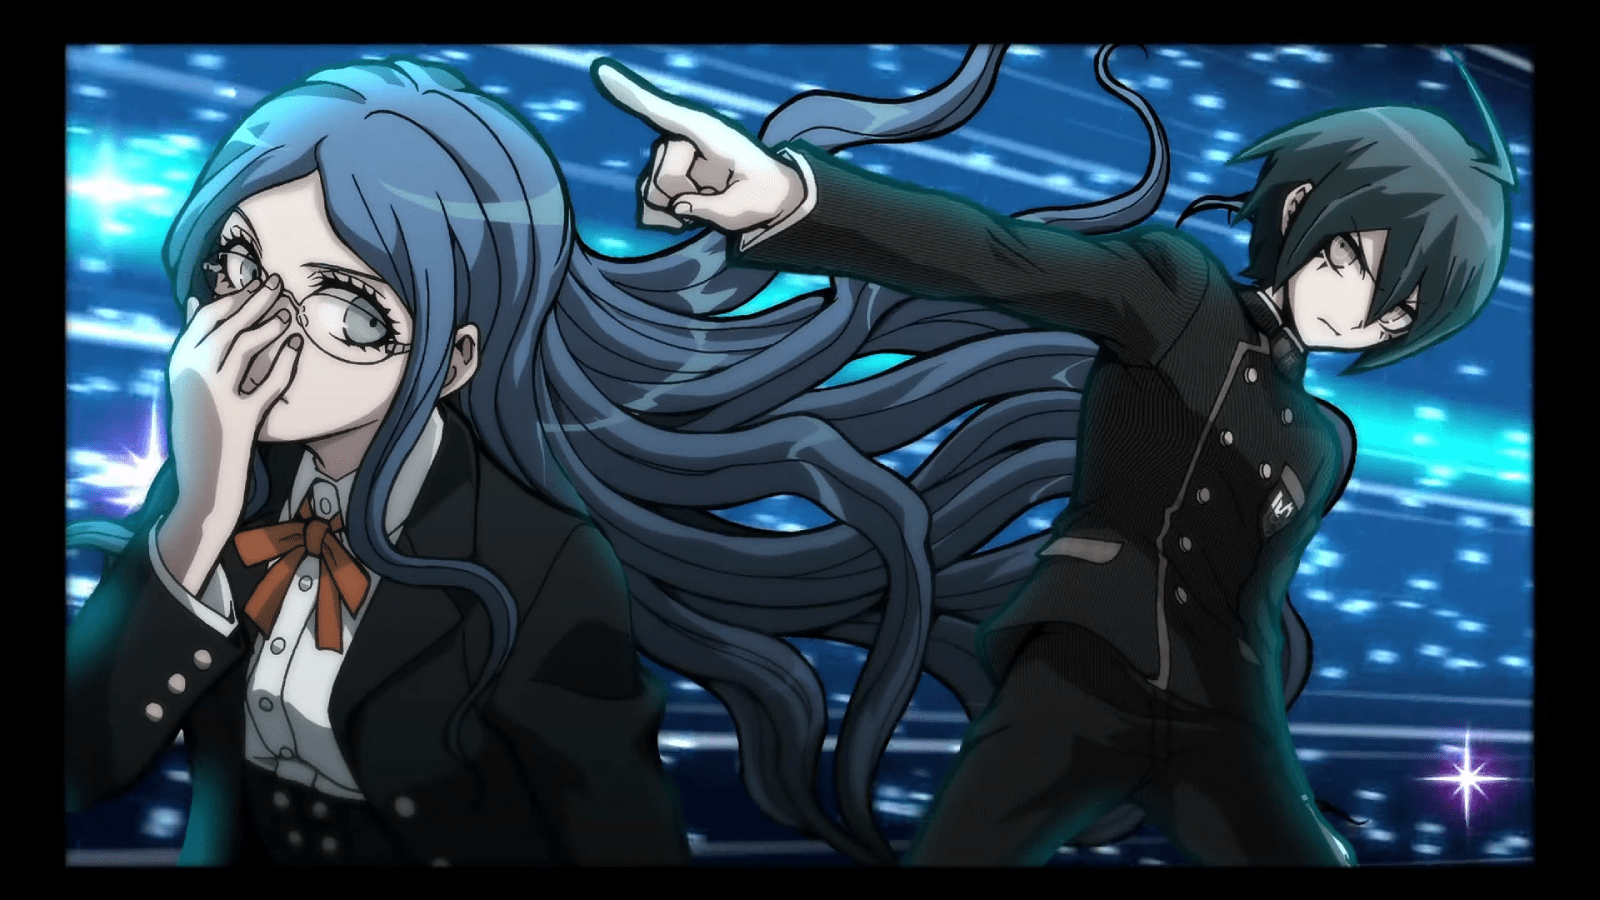 Tsumugi's Deception and The True Identity of the Students as Hope's Peak Academy Attendees